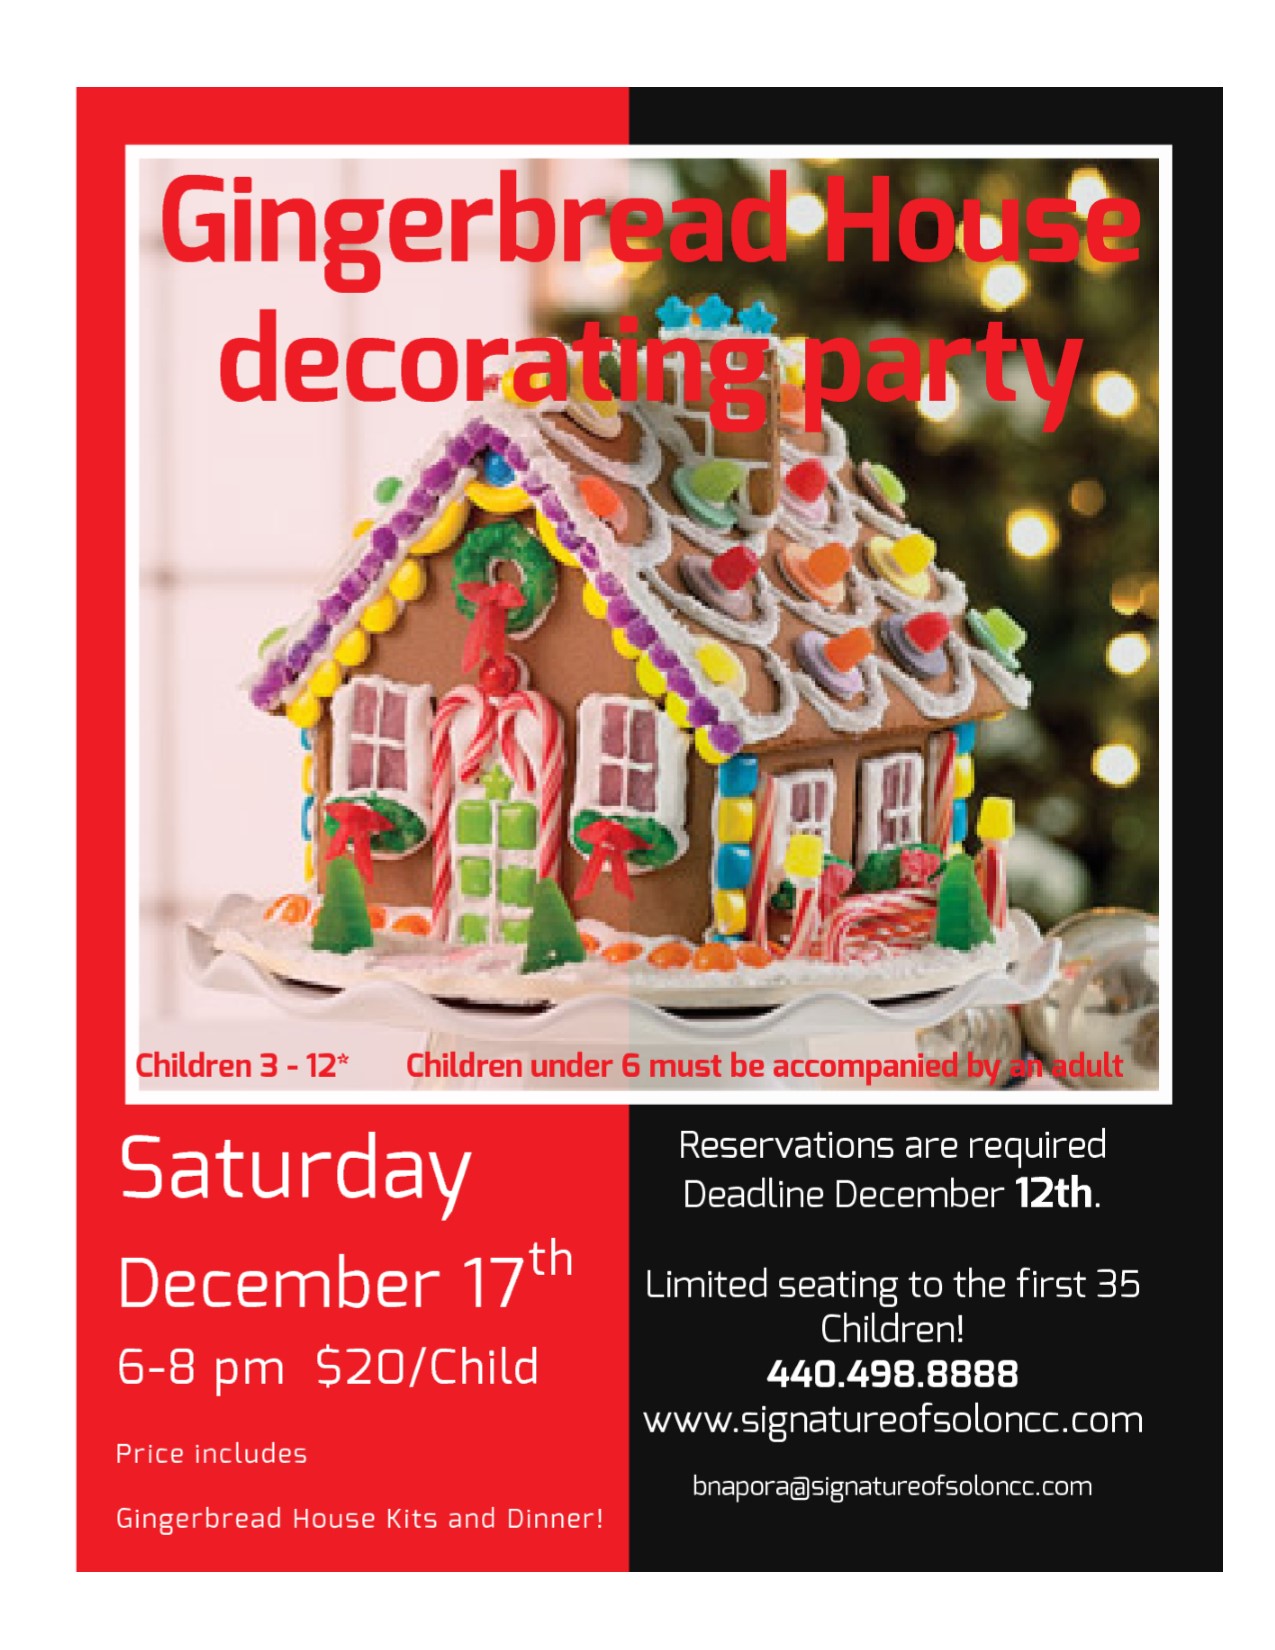 gingerbread-house-decorating-party-signature-of-solon-2016-12-17